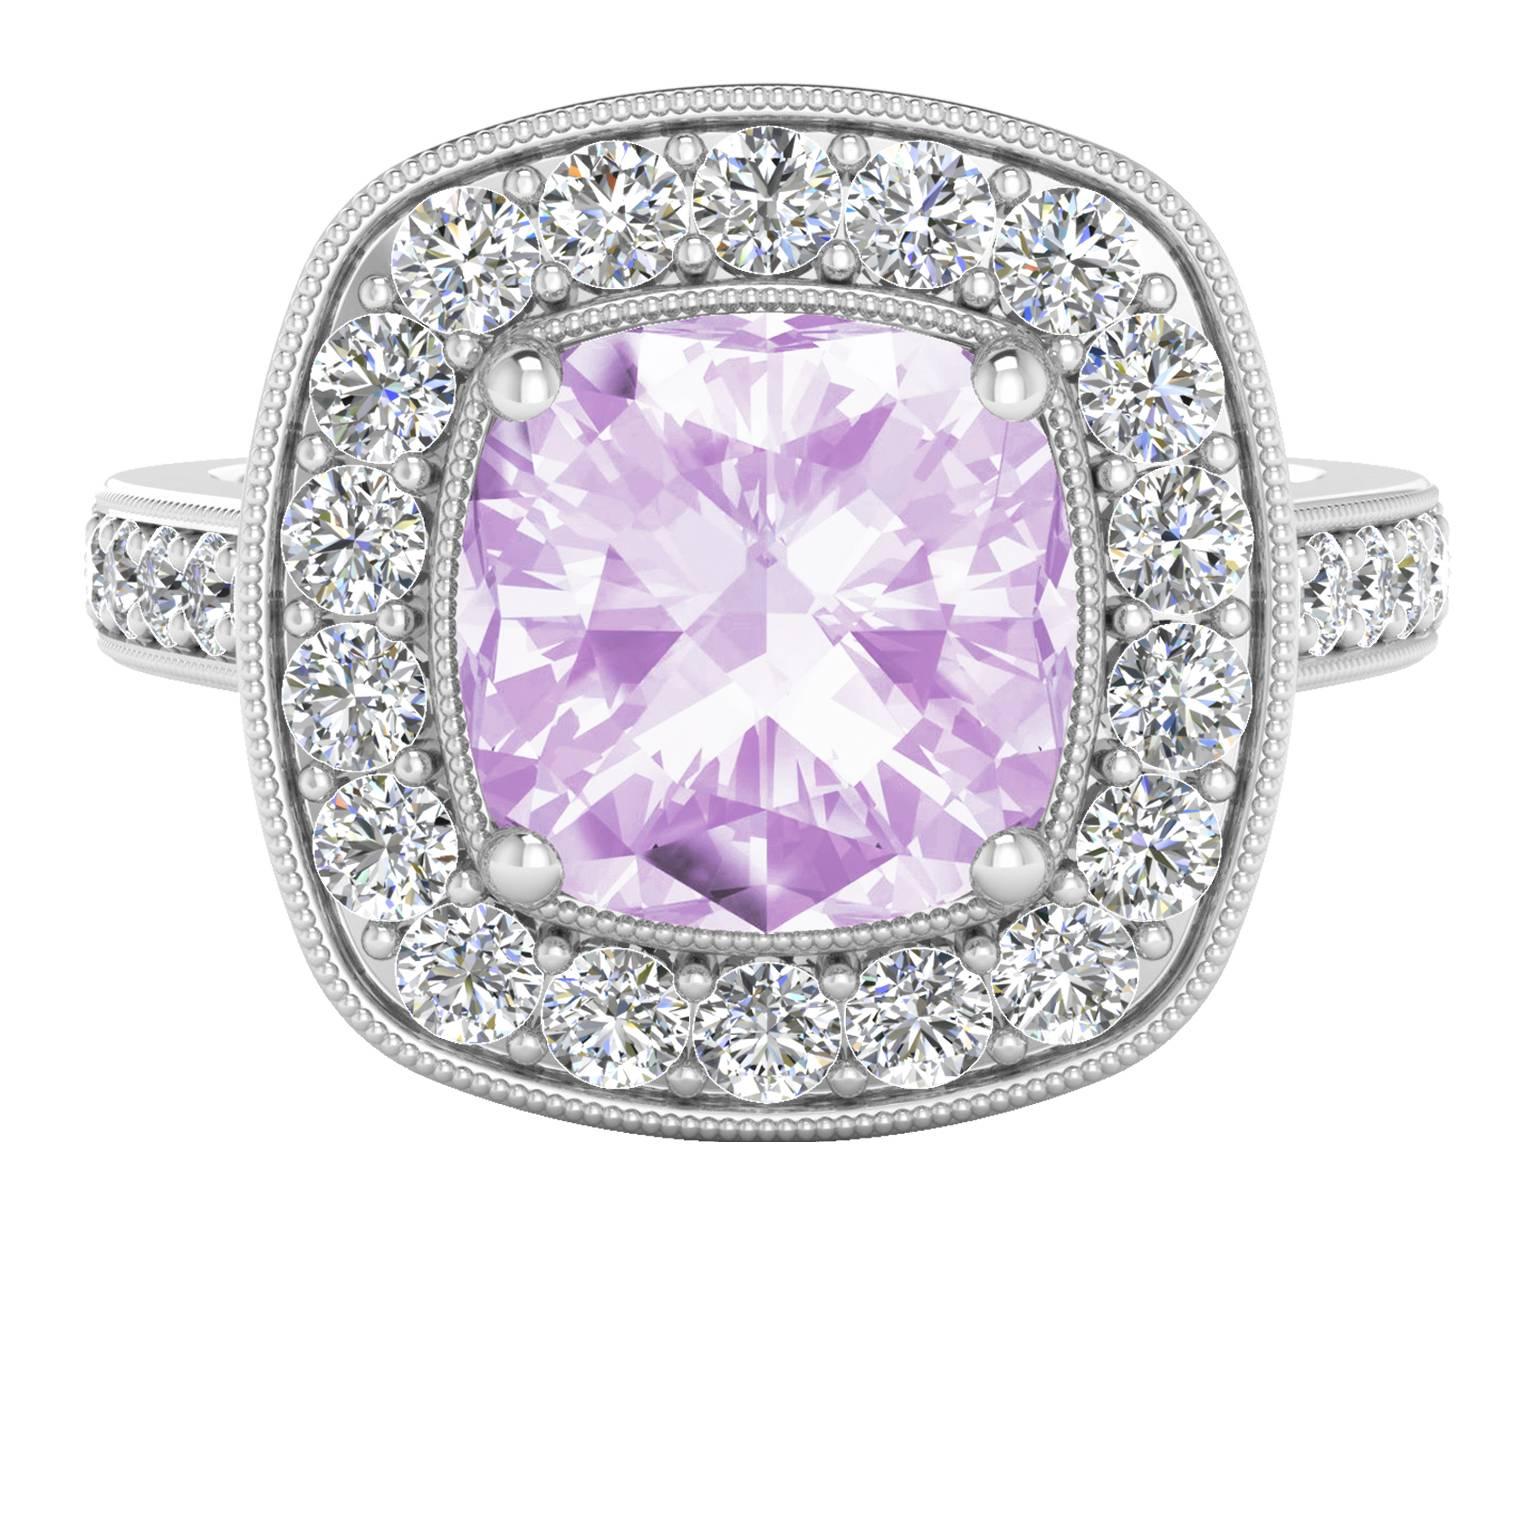 Pink amethyst is the 'it' gemstone of the moment, and this cushion cut diamond halo ring is nothing short of stunning. Beautiful, feminine and unusual all at once, this ring makes a wonderful gift for any woman. With the delicate hues of the pale